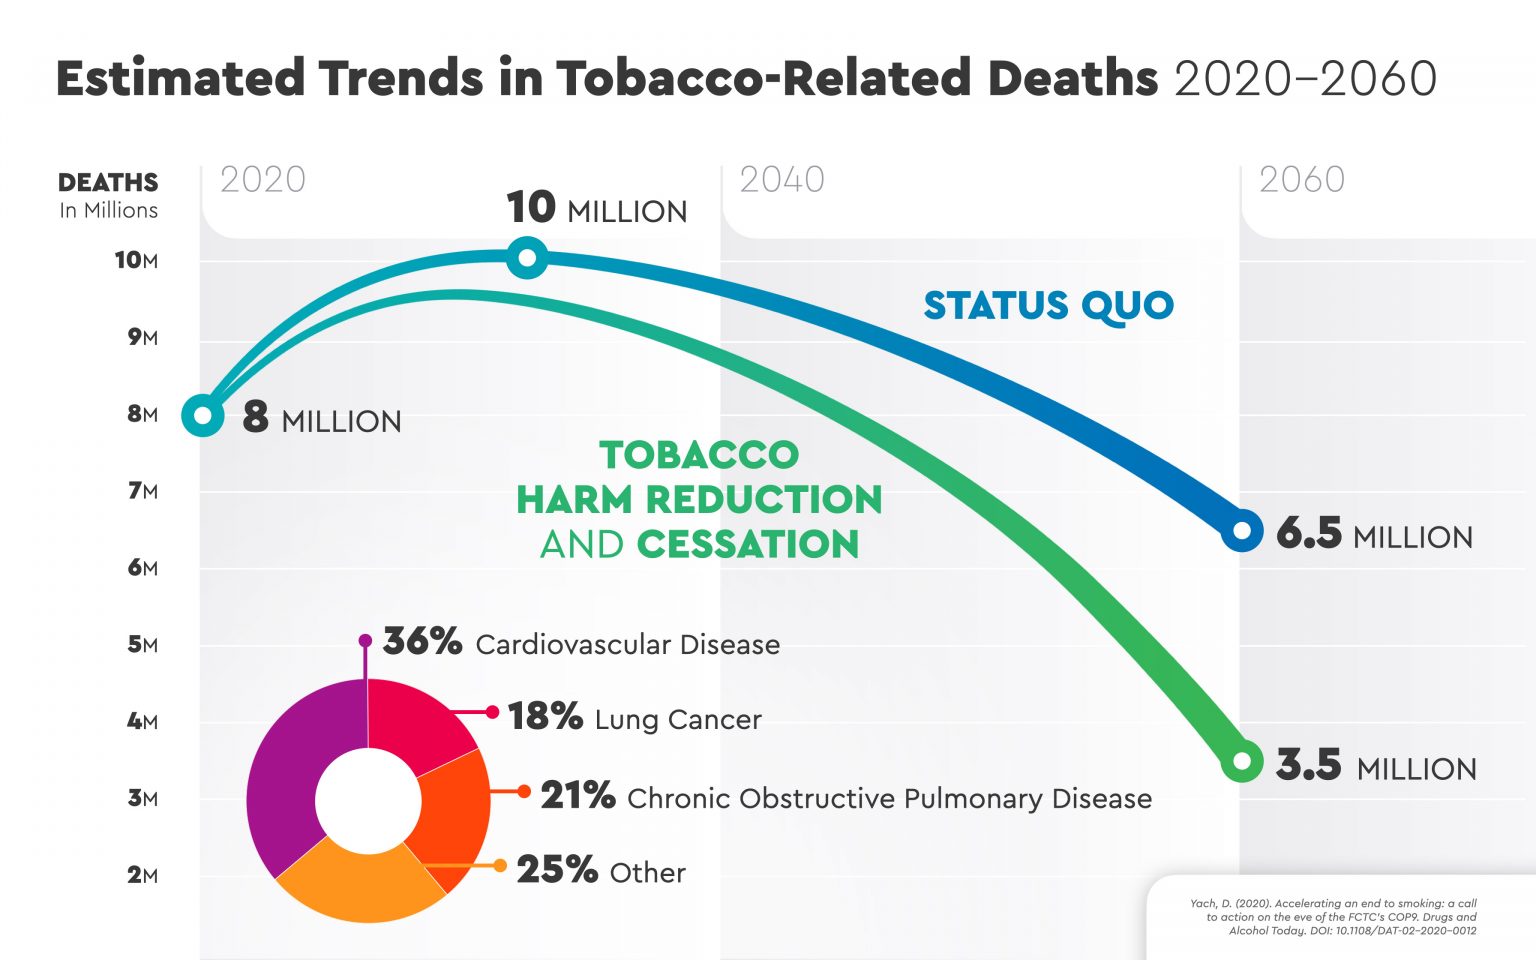 FCTC Secretariat relaunches plan for accelerated tobacco control, highlighting WHO's bureaucratic inaction